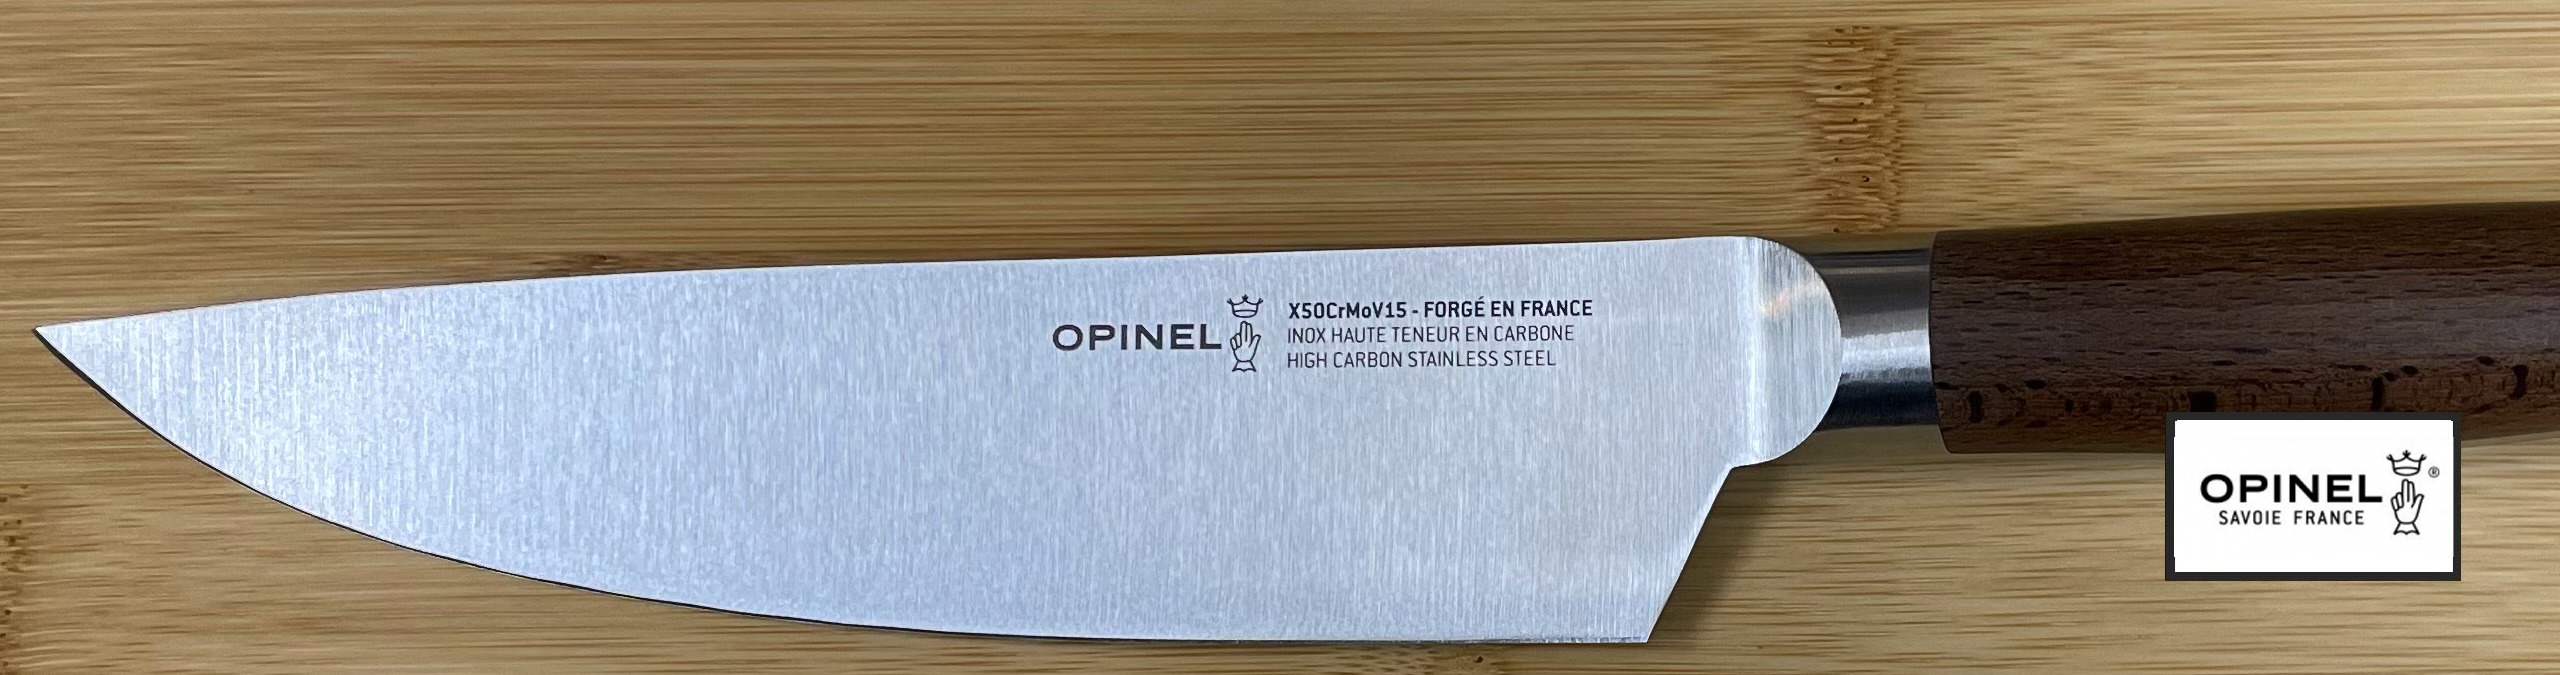 Opinel forgés